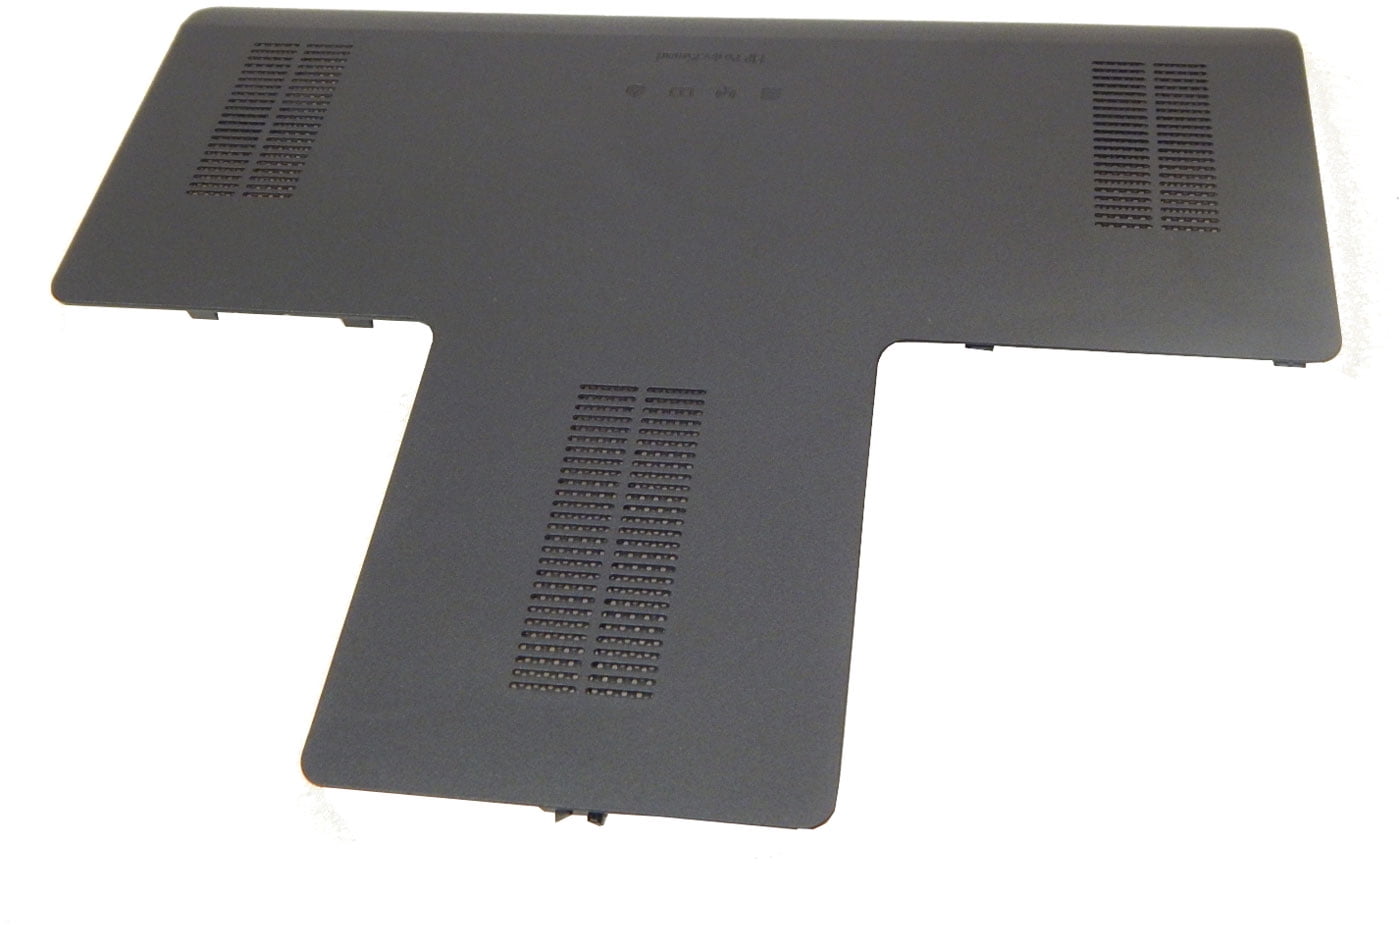 HP Pavilion DV7 HDD Door Cover 668098-001 665604-001 